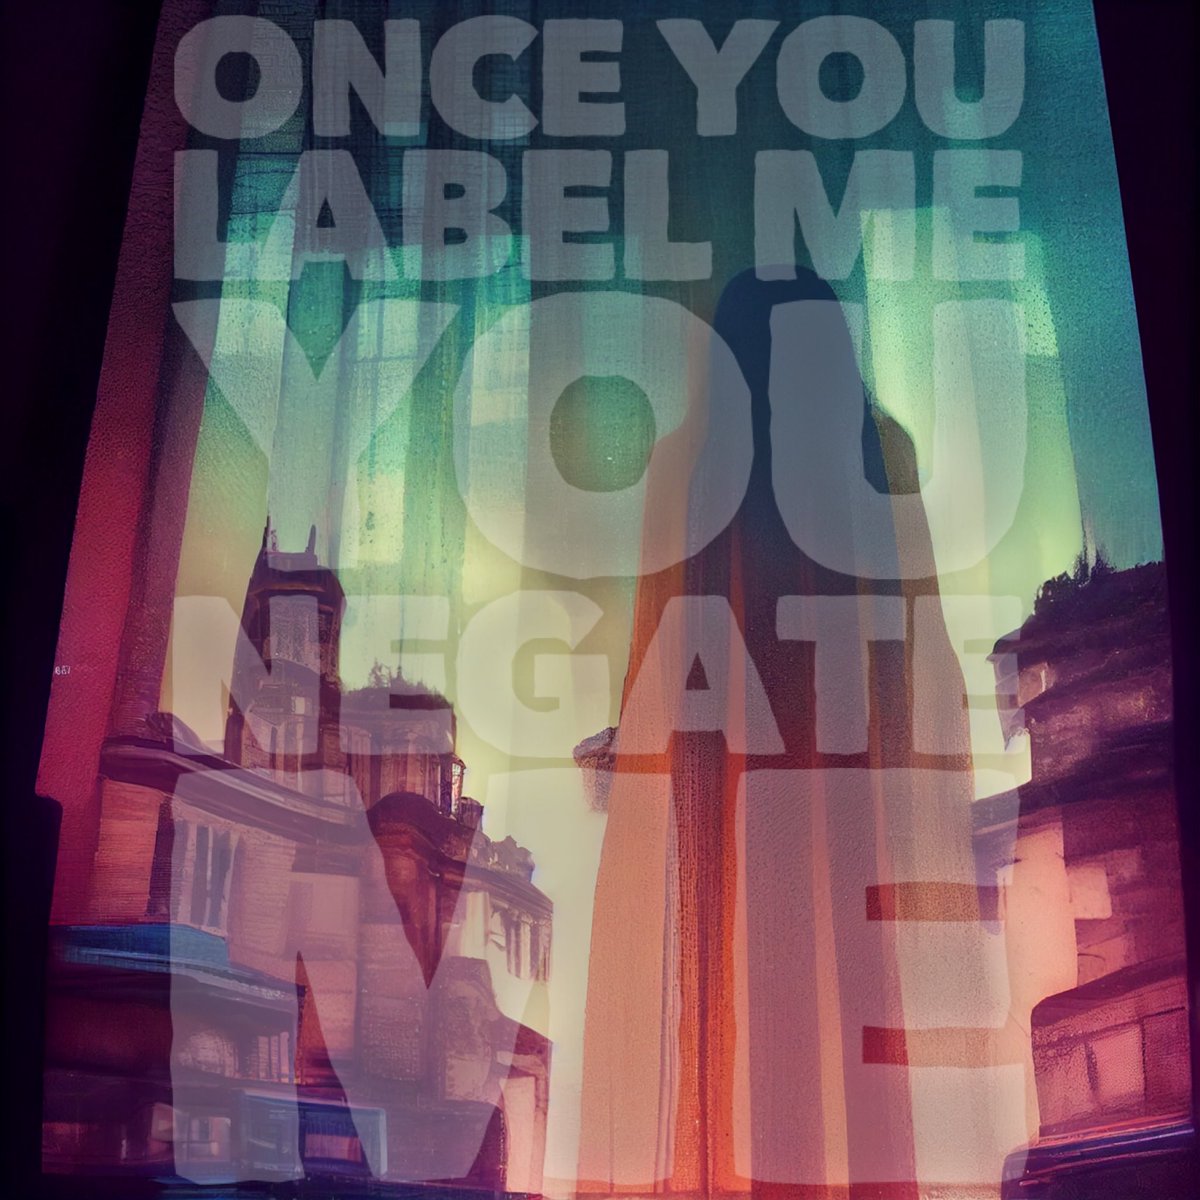 #Once #you #label #me, #you #negate #me. 
#labels #titles #uncalledfor #standup #standupforyourself #ifnottoday #thenwhen #transparency #transparent #mentalhealth #mentalhealthawareness #MentalHealthMatters #mentalhealthsupport #mentalwellbeing #mentalwellnessmatters #takecare